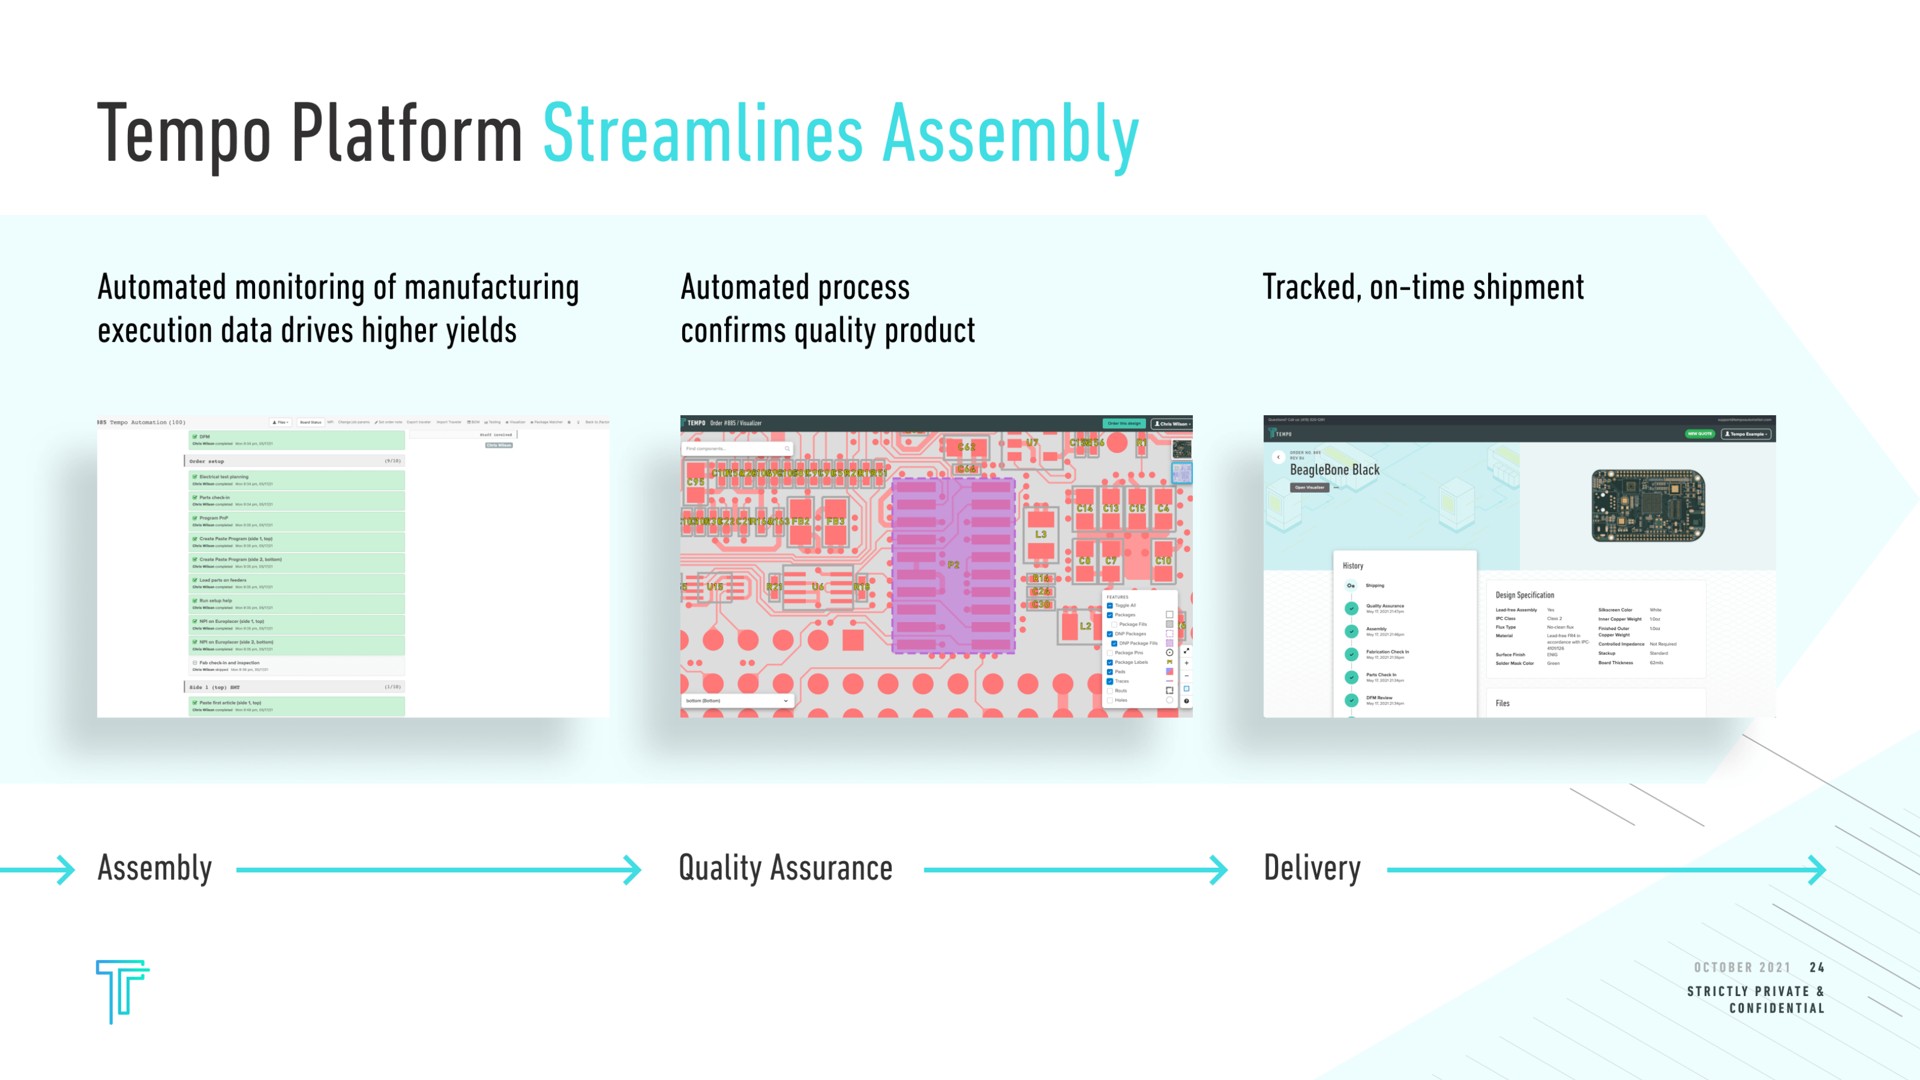 tempo platform streamlines assembly monitoring of manufacturing execution data drives higher yields process confirms quality product tracked on time shipment a assembly quality assurance delivery a | Tempo